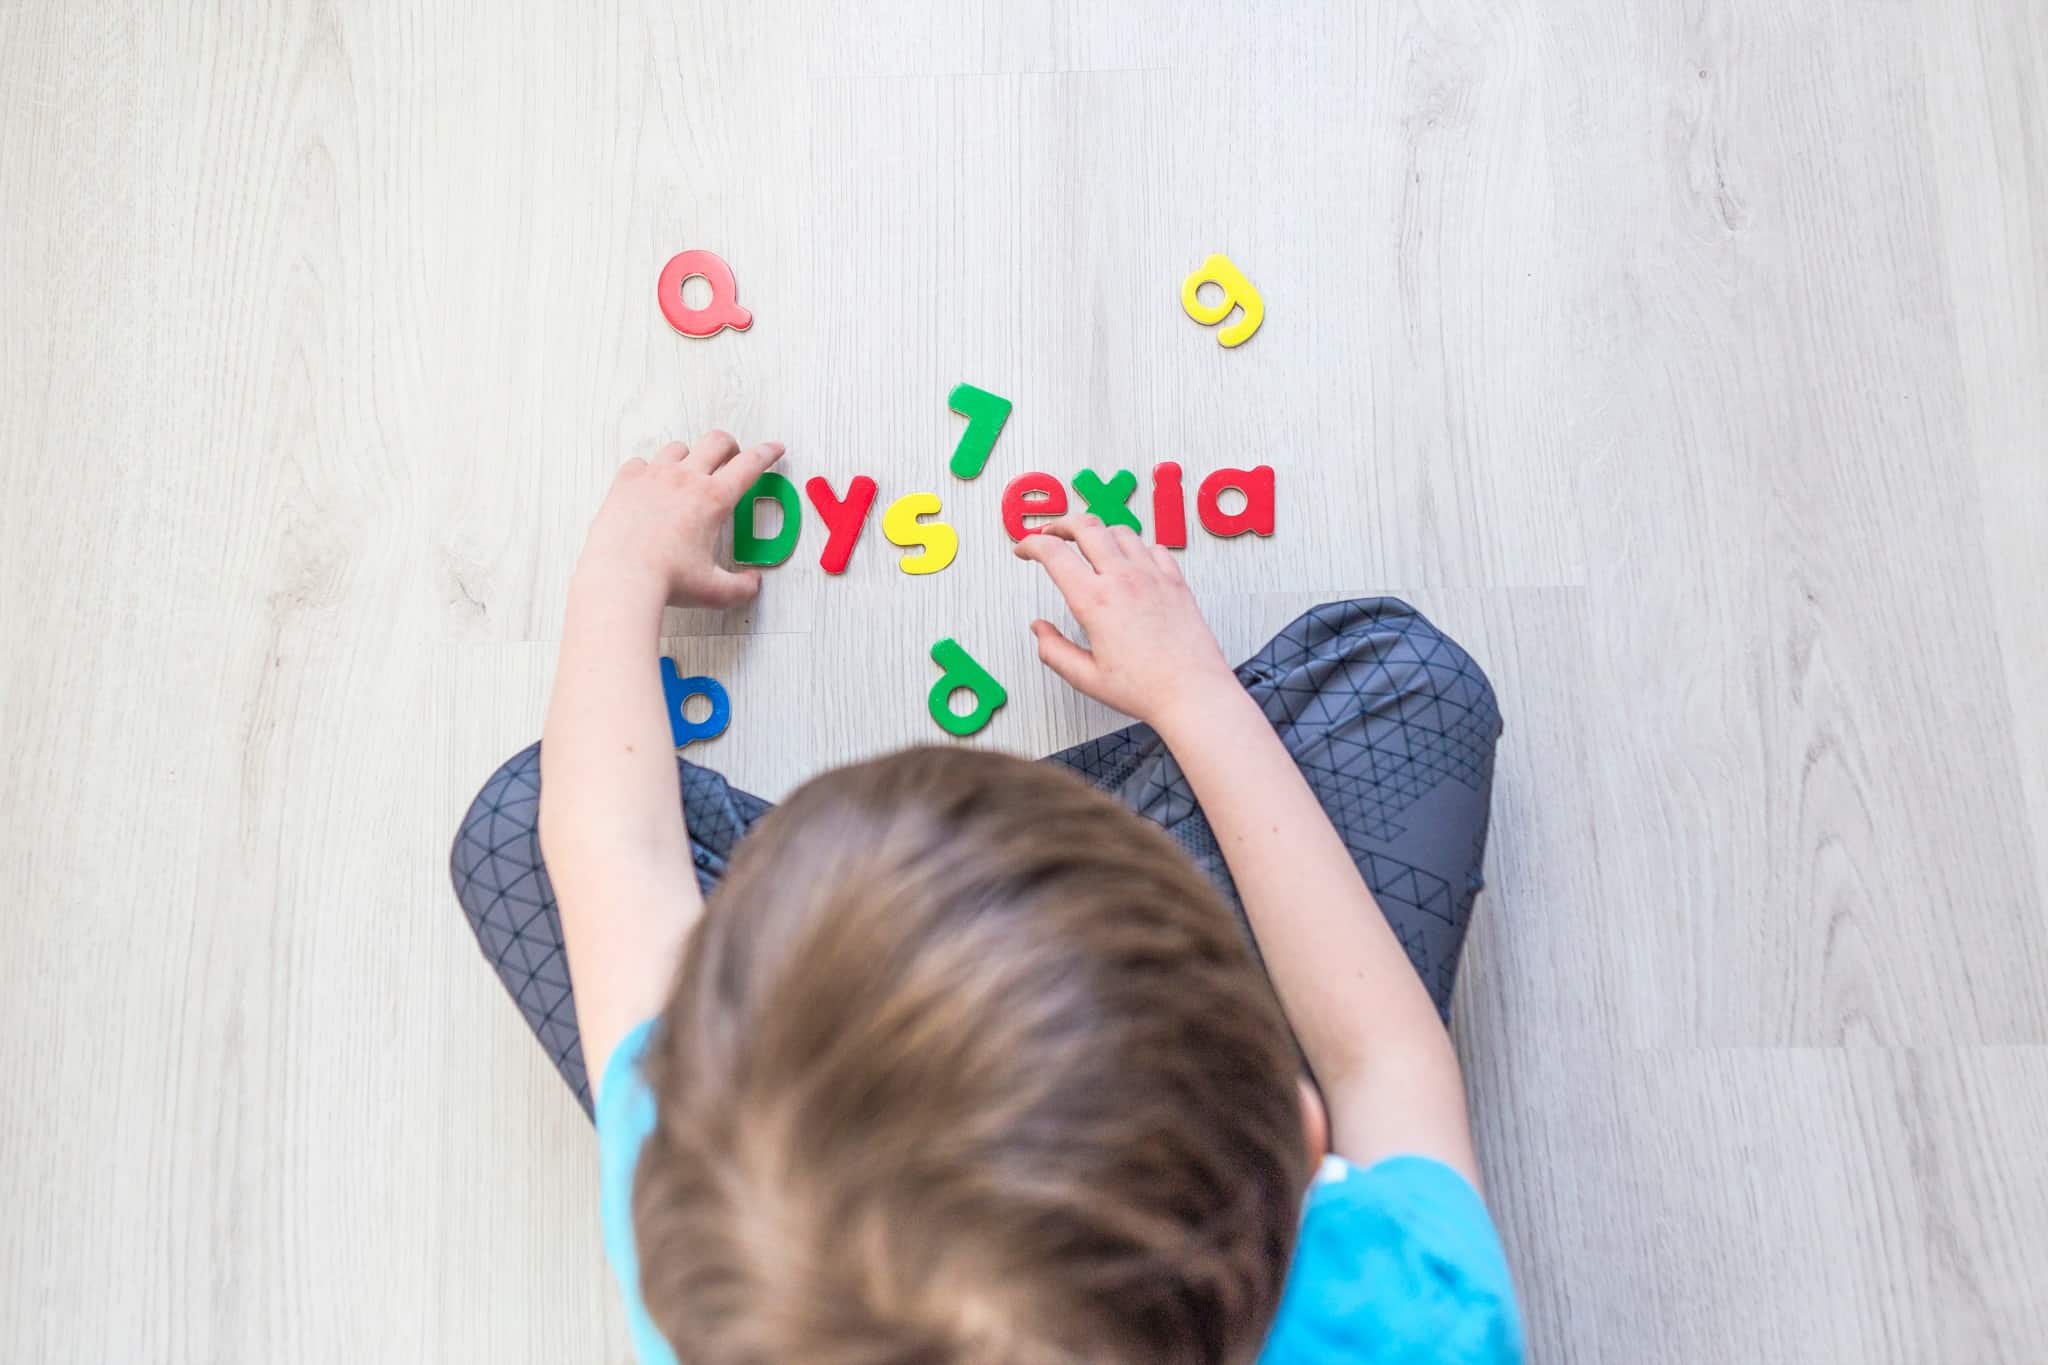 Child with dyslexia organizing letters